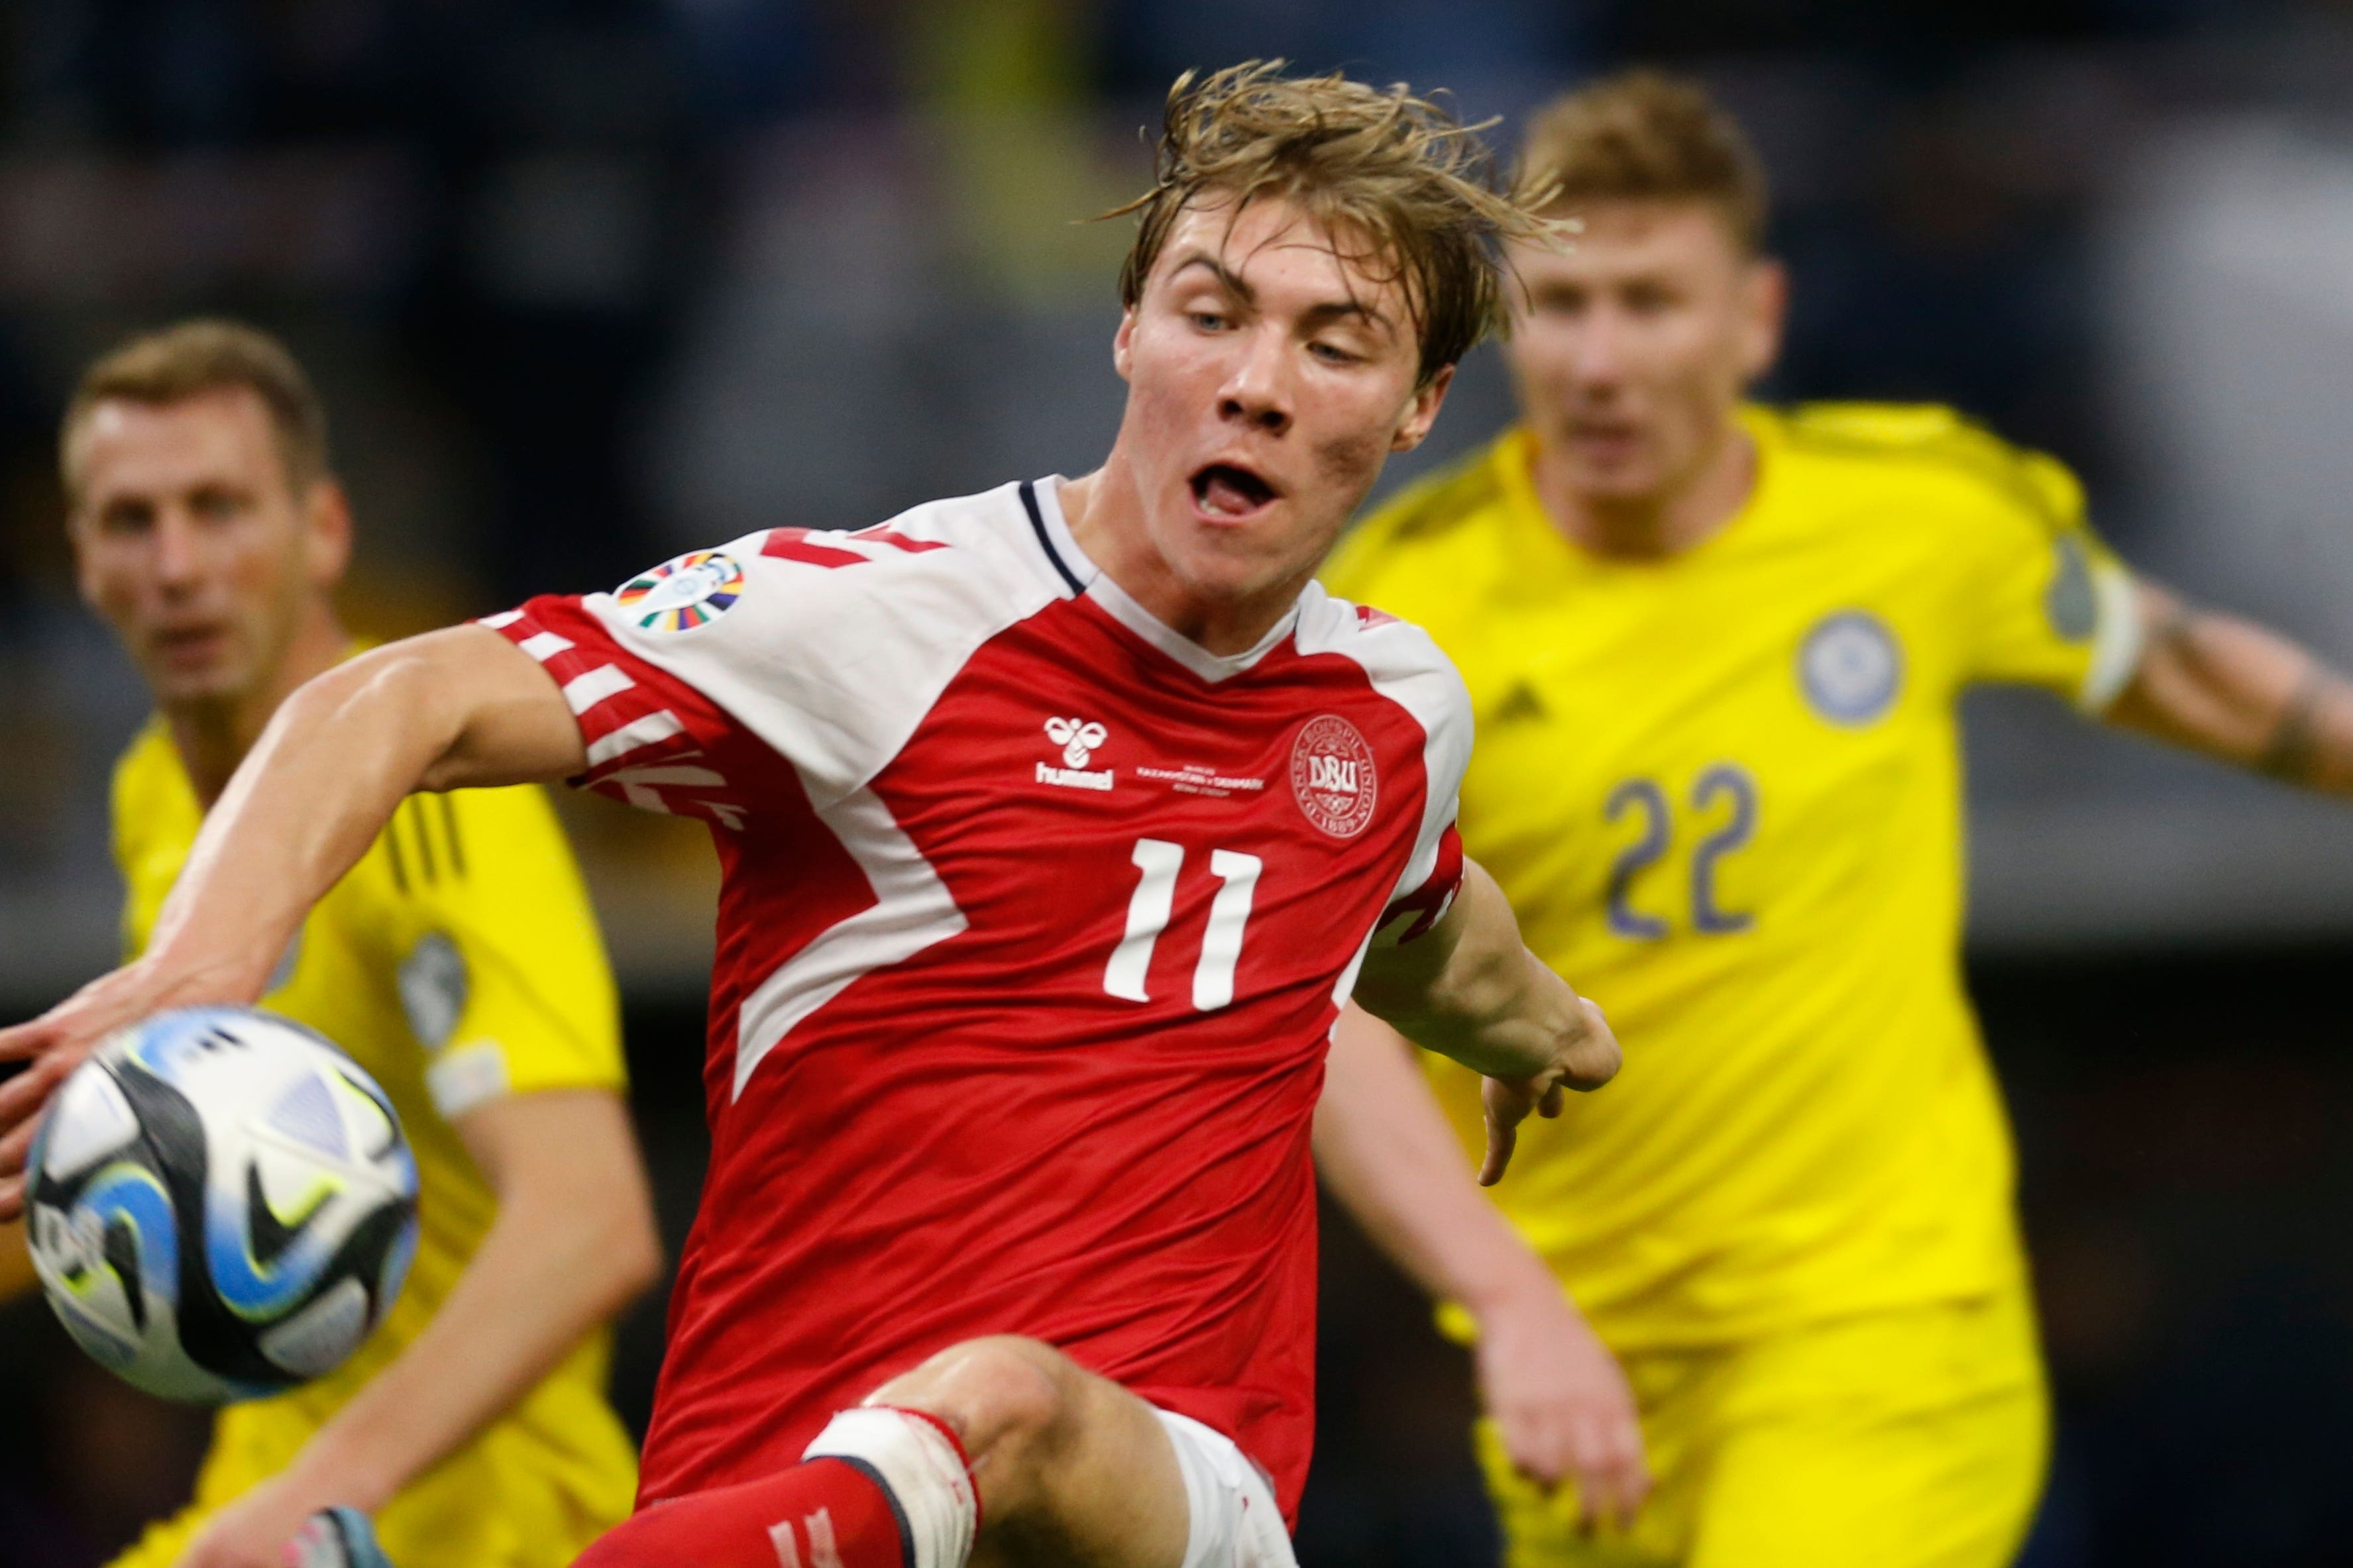 Tottenham move to sign the new €100-115 million  Erling Haaland as Kane set to leave 